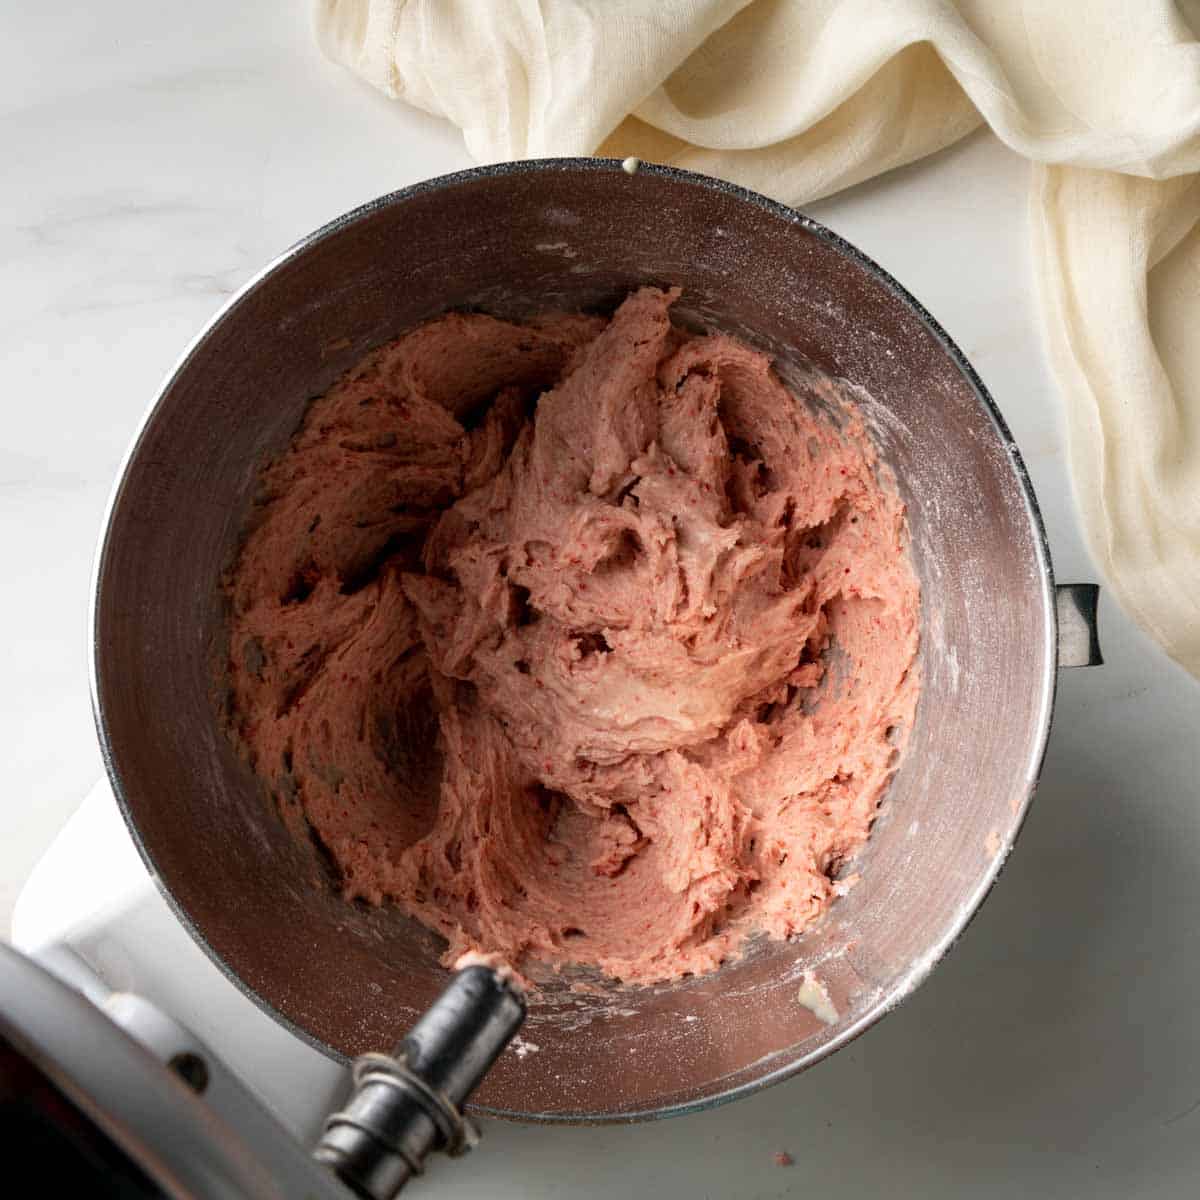 A thick pink strawberry cake batter in the bowl of a stand mixer